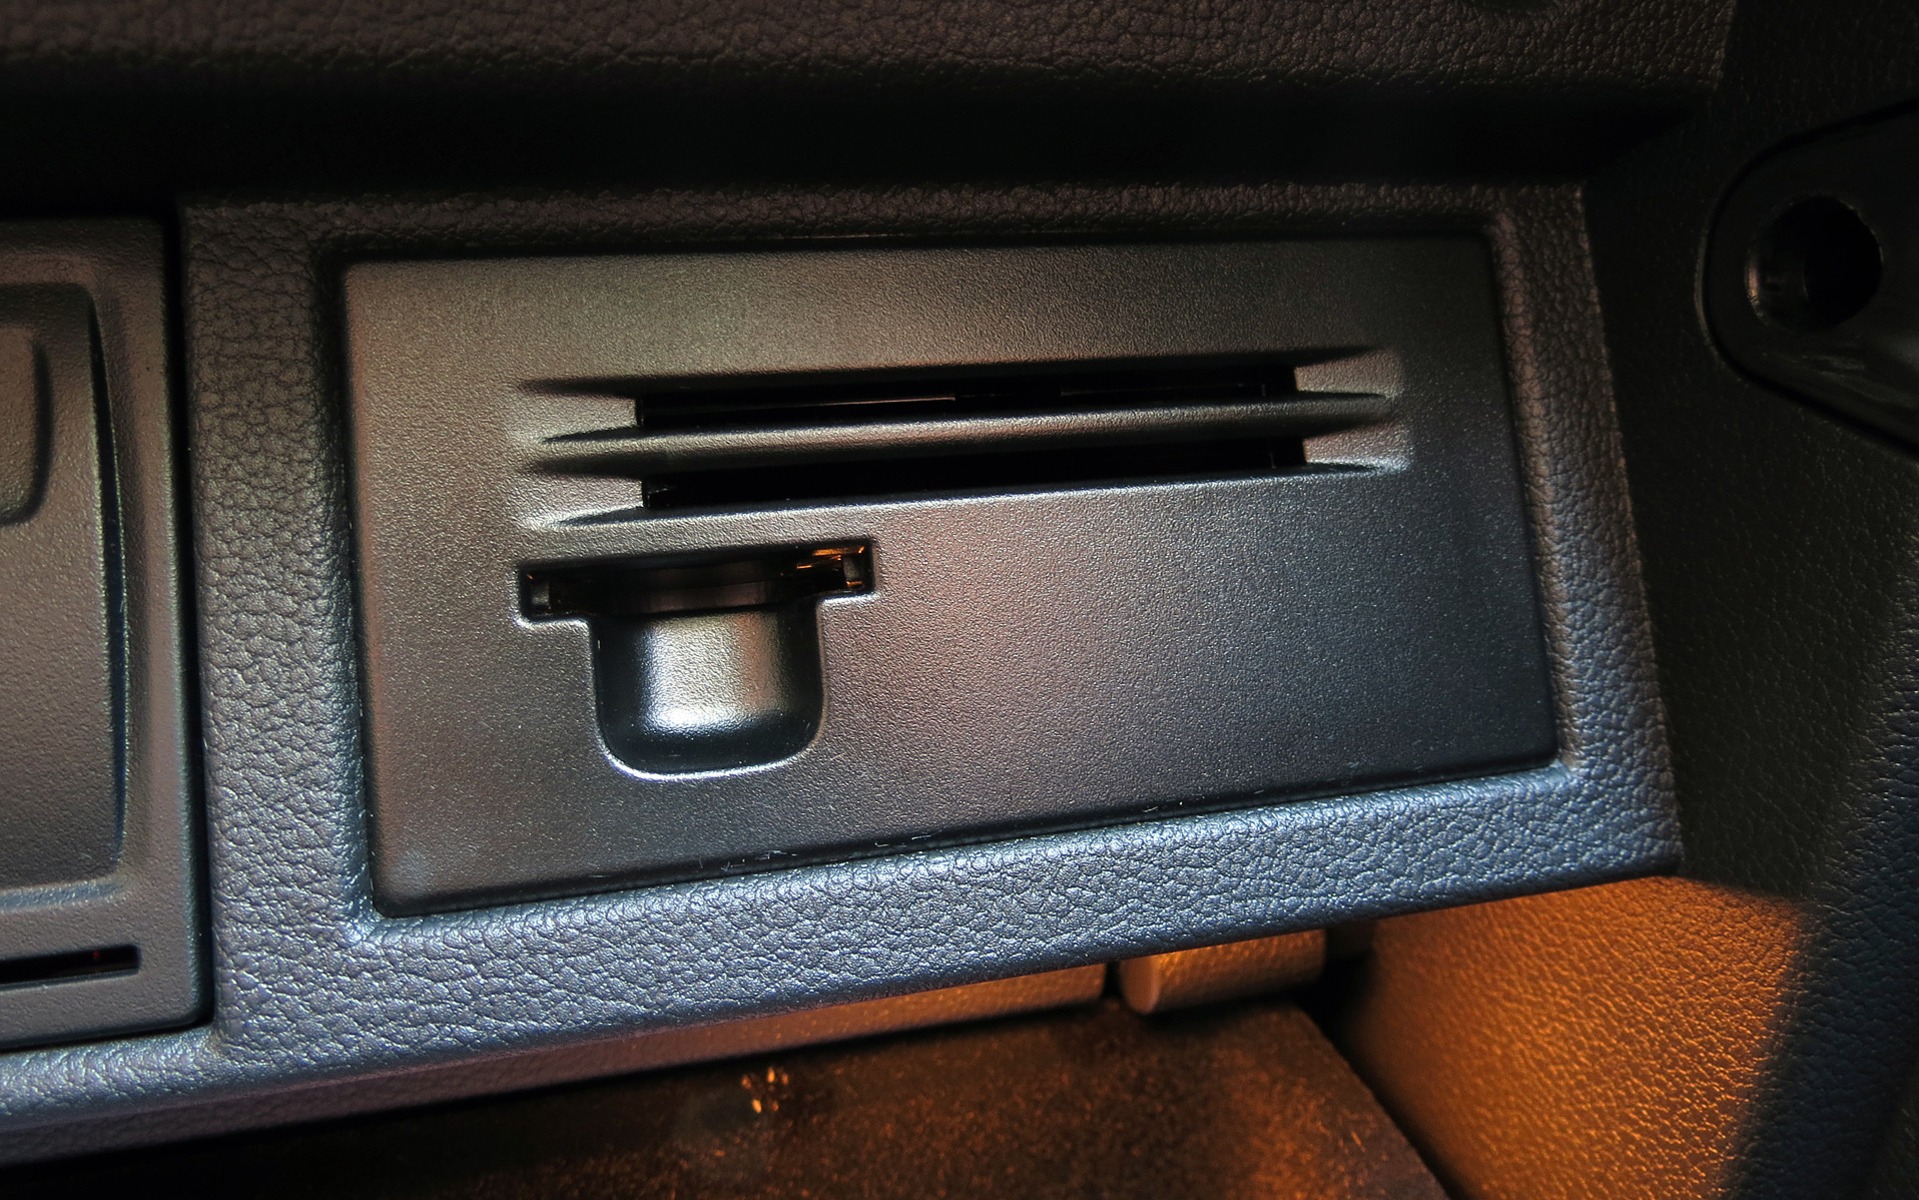 Slots to accommodate other devices in the glovebox.